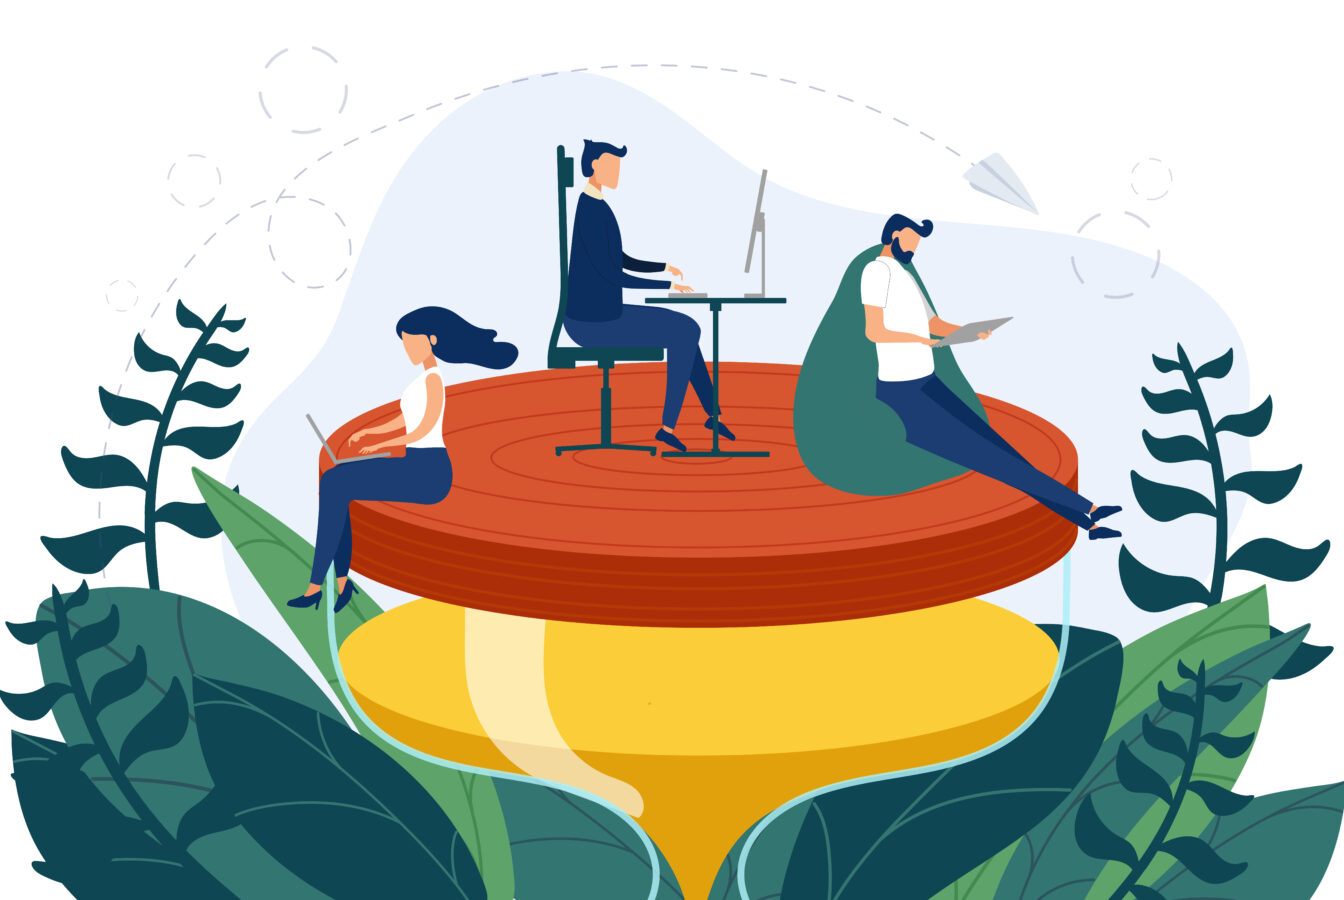 An illustration shows people working on an hourglass and a tree, which represents employee wellbeing.